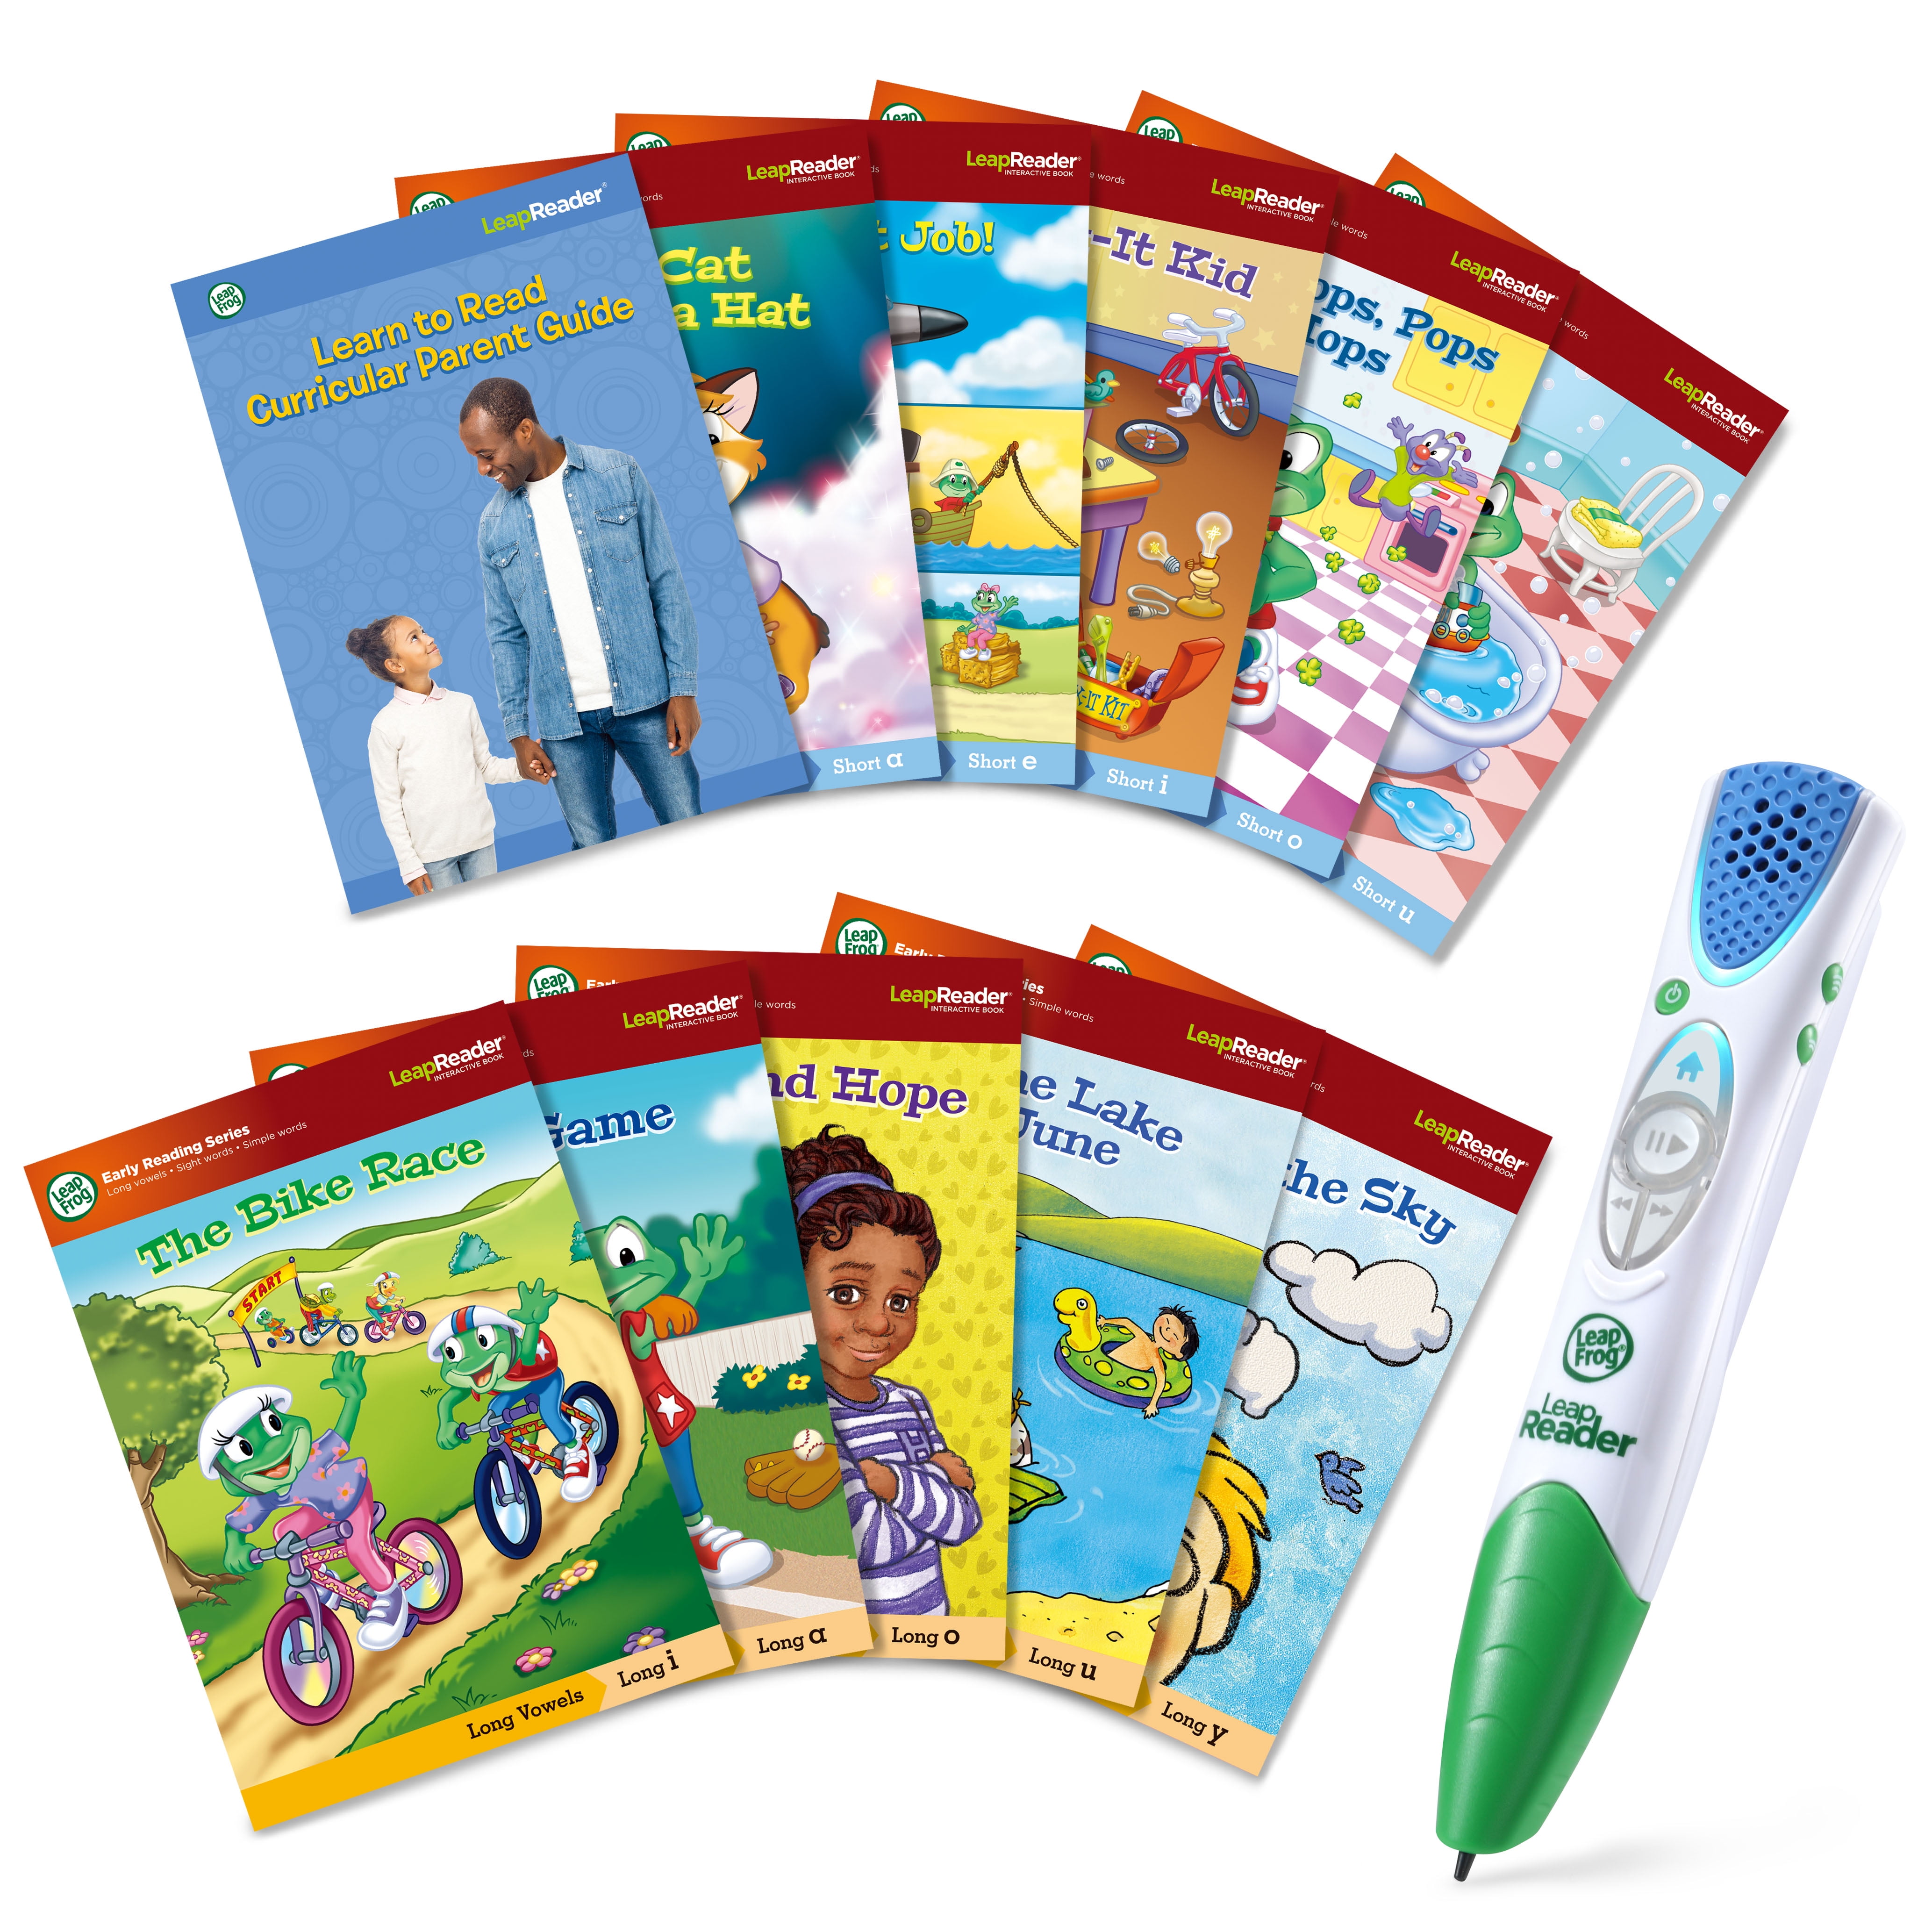 $3.99 when you buy 4 or more Books LEAPFROG TAG or LEAPREADER & Junior BOOKS 